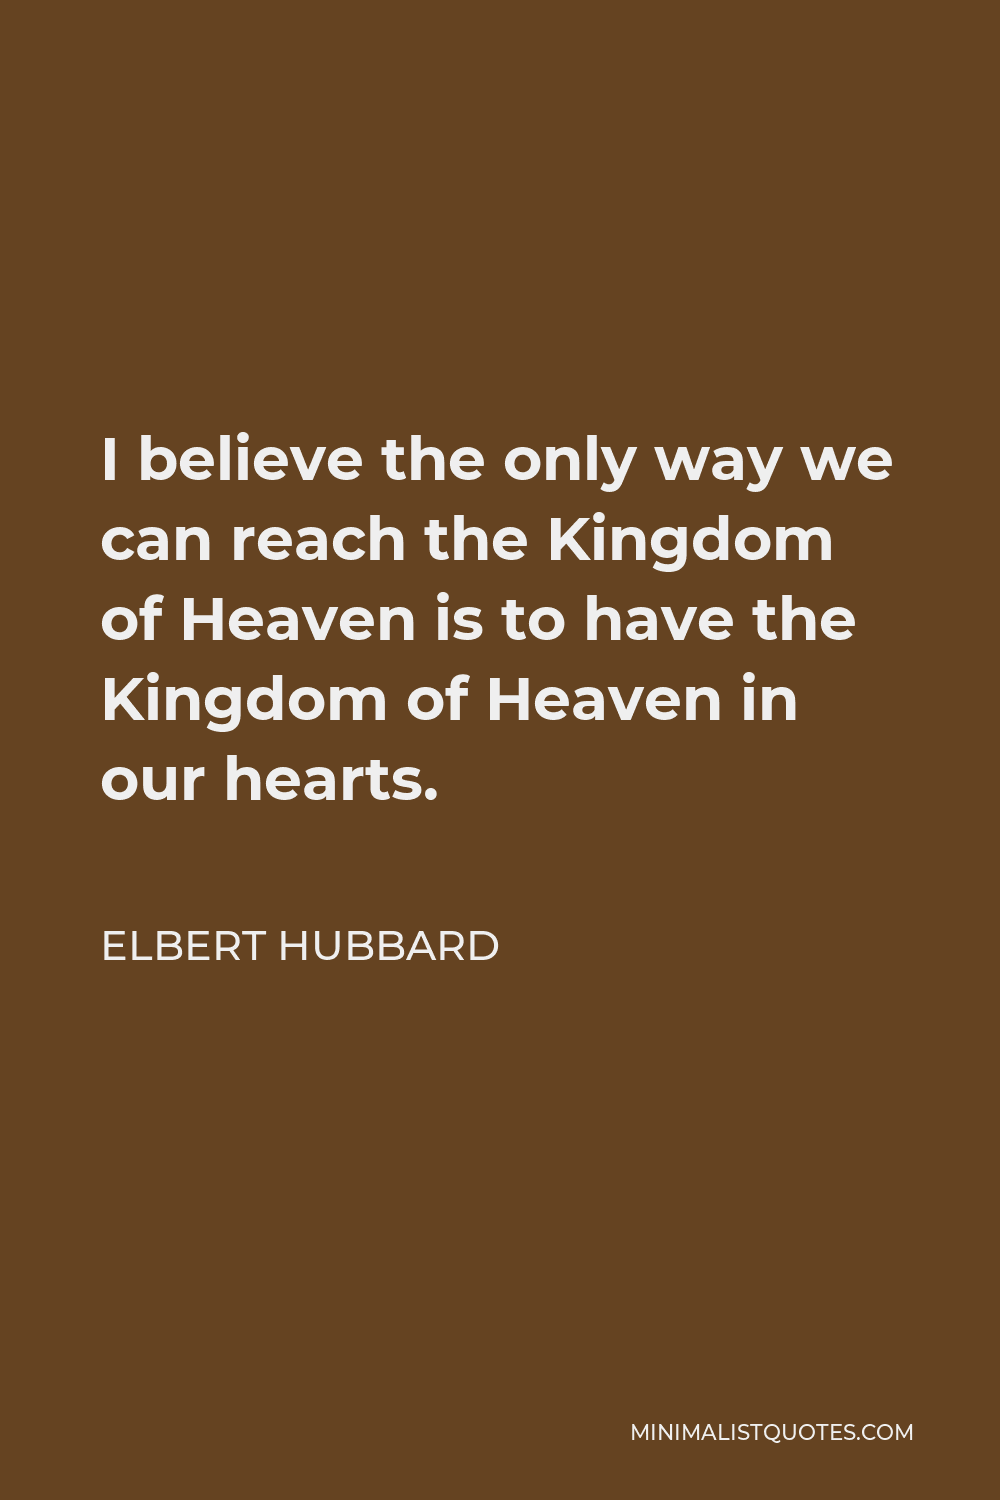 Elbert Hubbard Quote - I believe the only way we can reach the Kingdom of Heaven is to have the Kingdom of Heaven in our hearts.